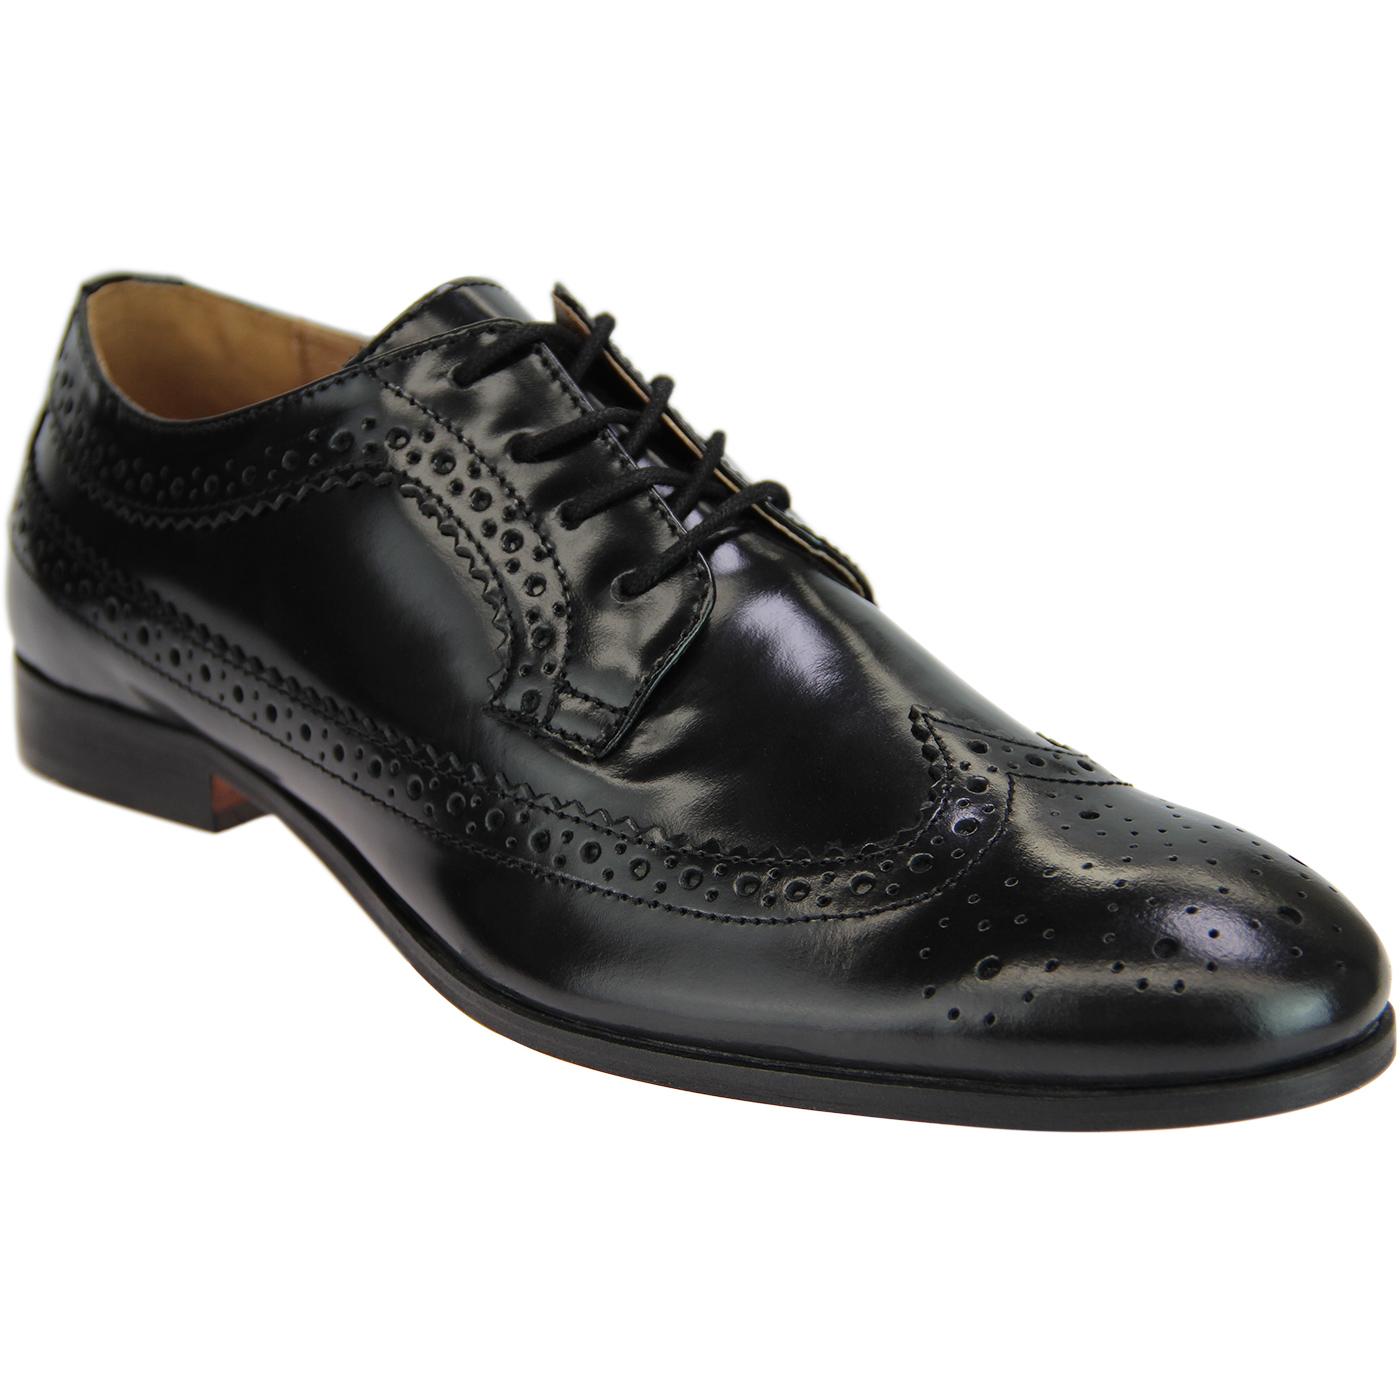 HUDSON Crowthorne Retro 60s Mod Leather Brogues in Black